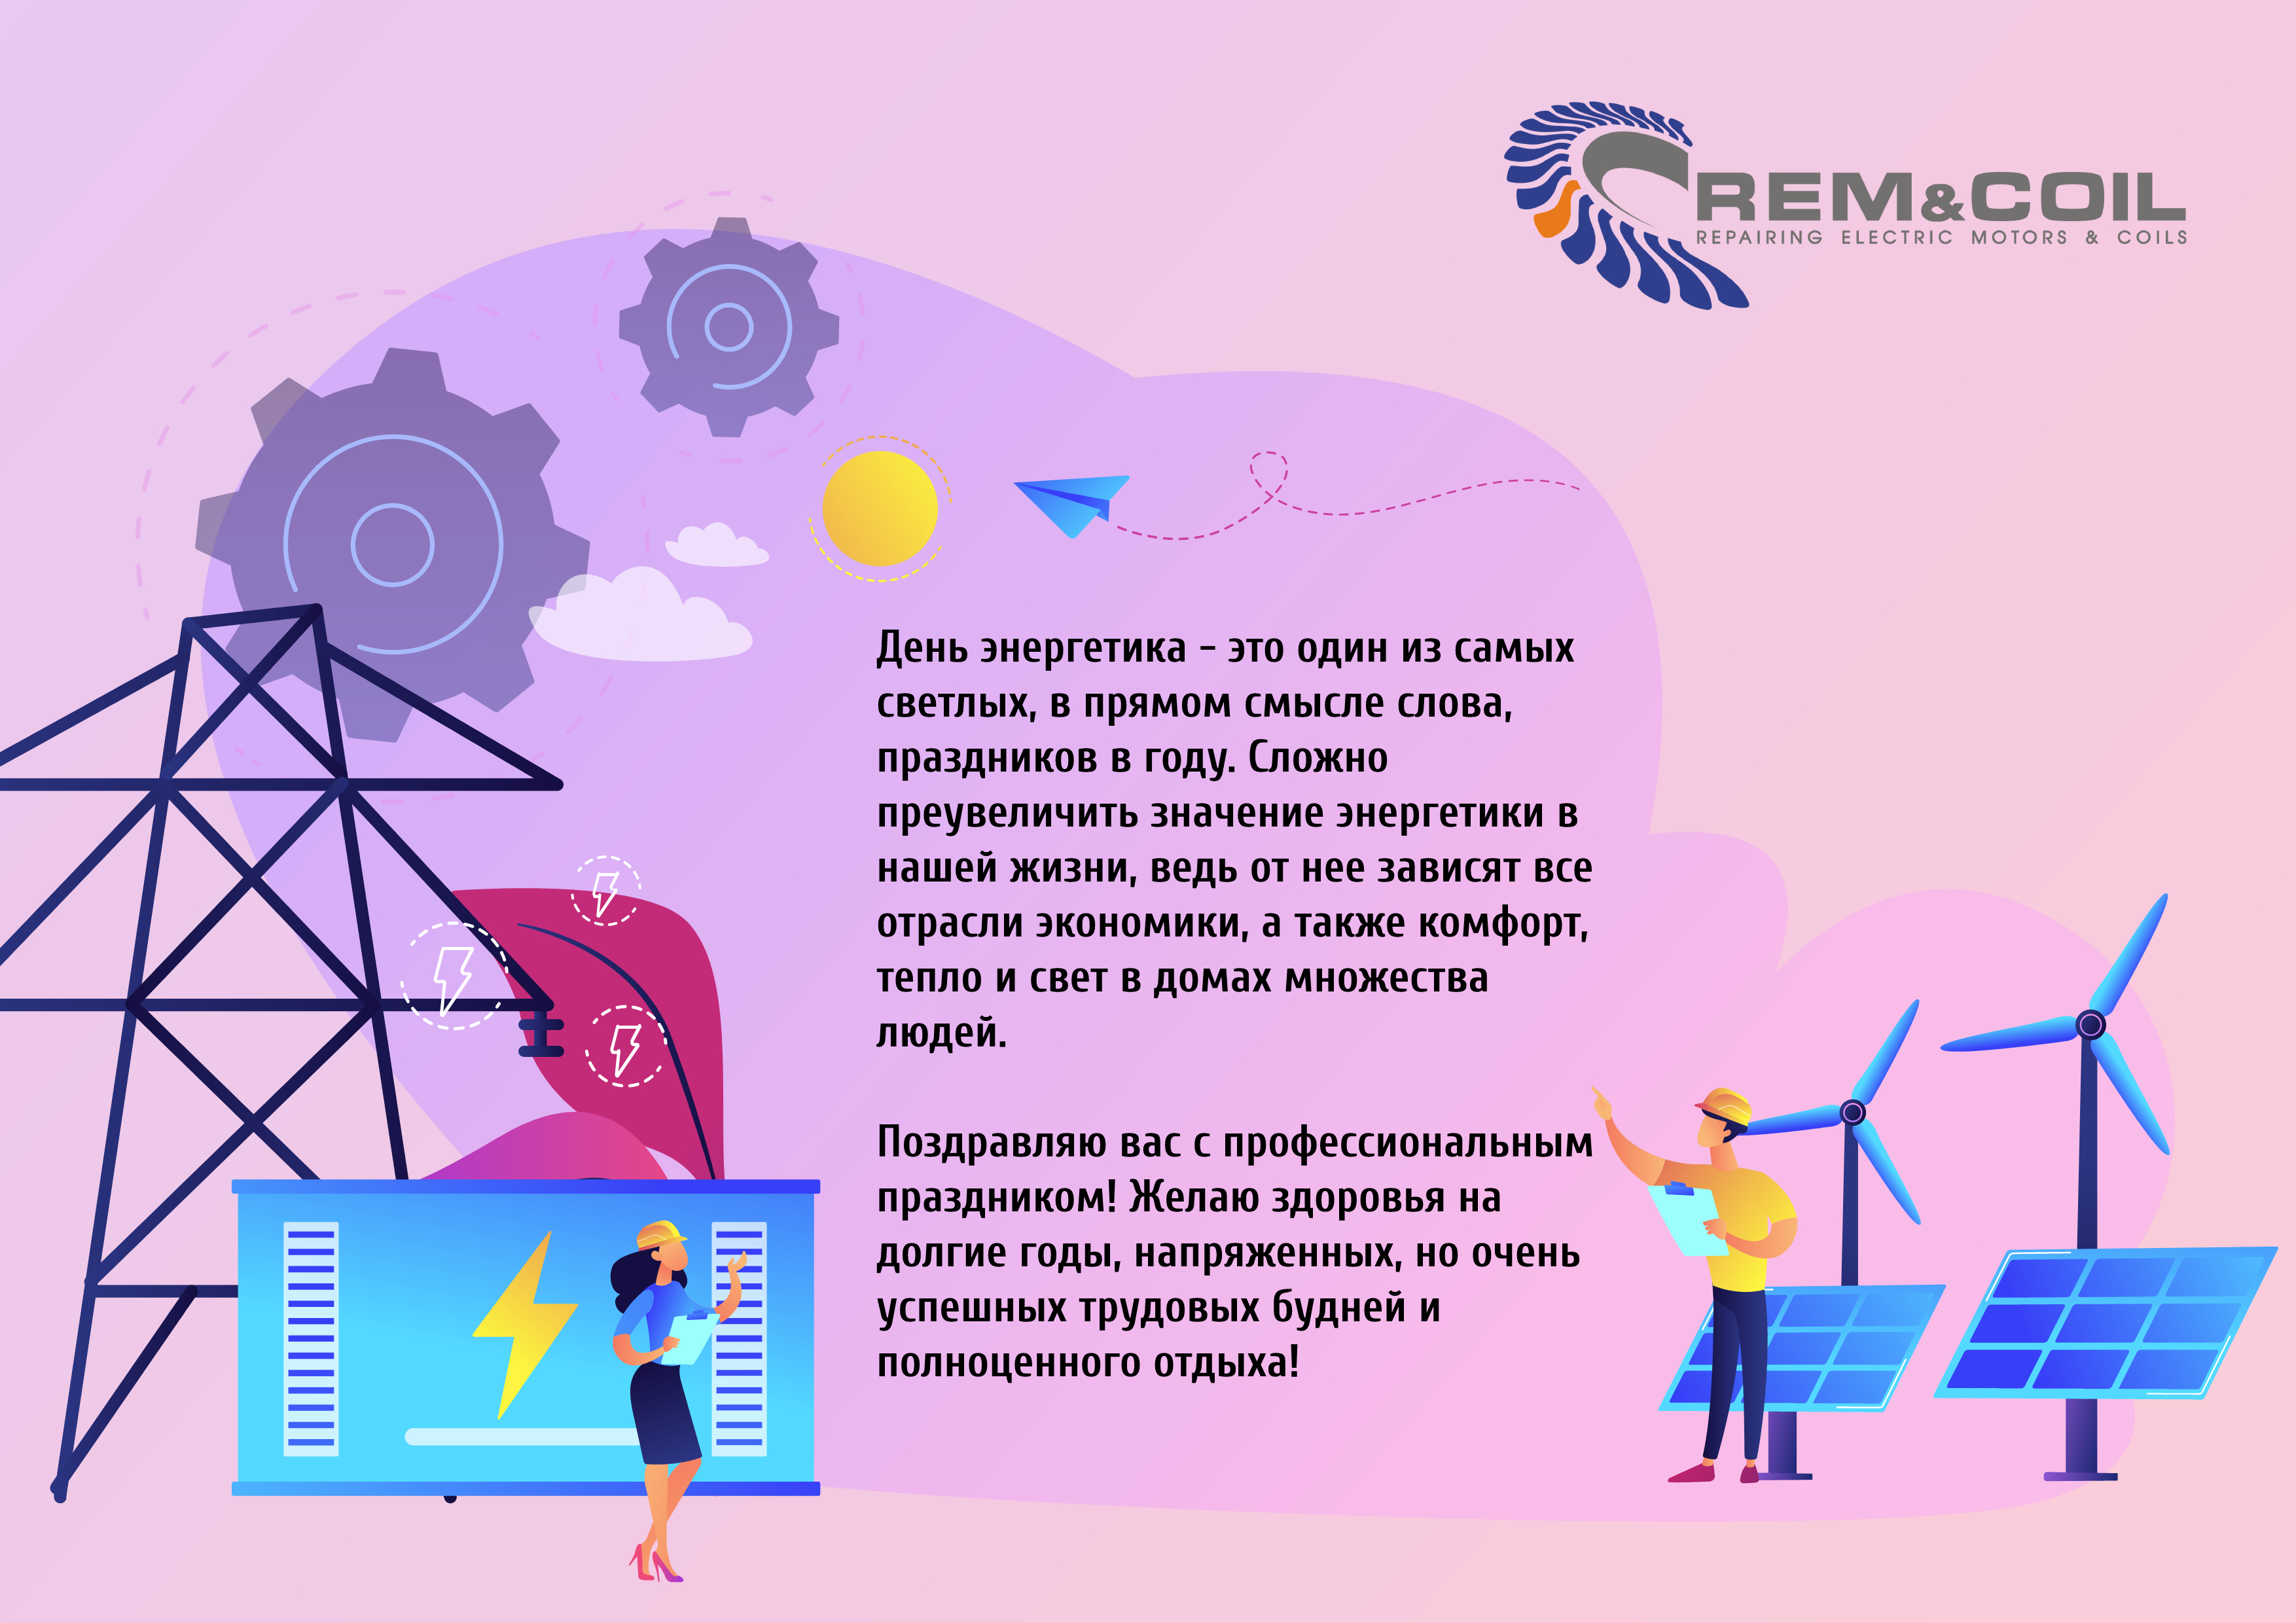 Happy Power Engineers' Day from Rem&Coil!